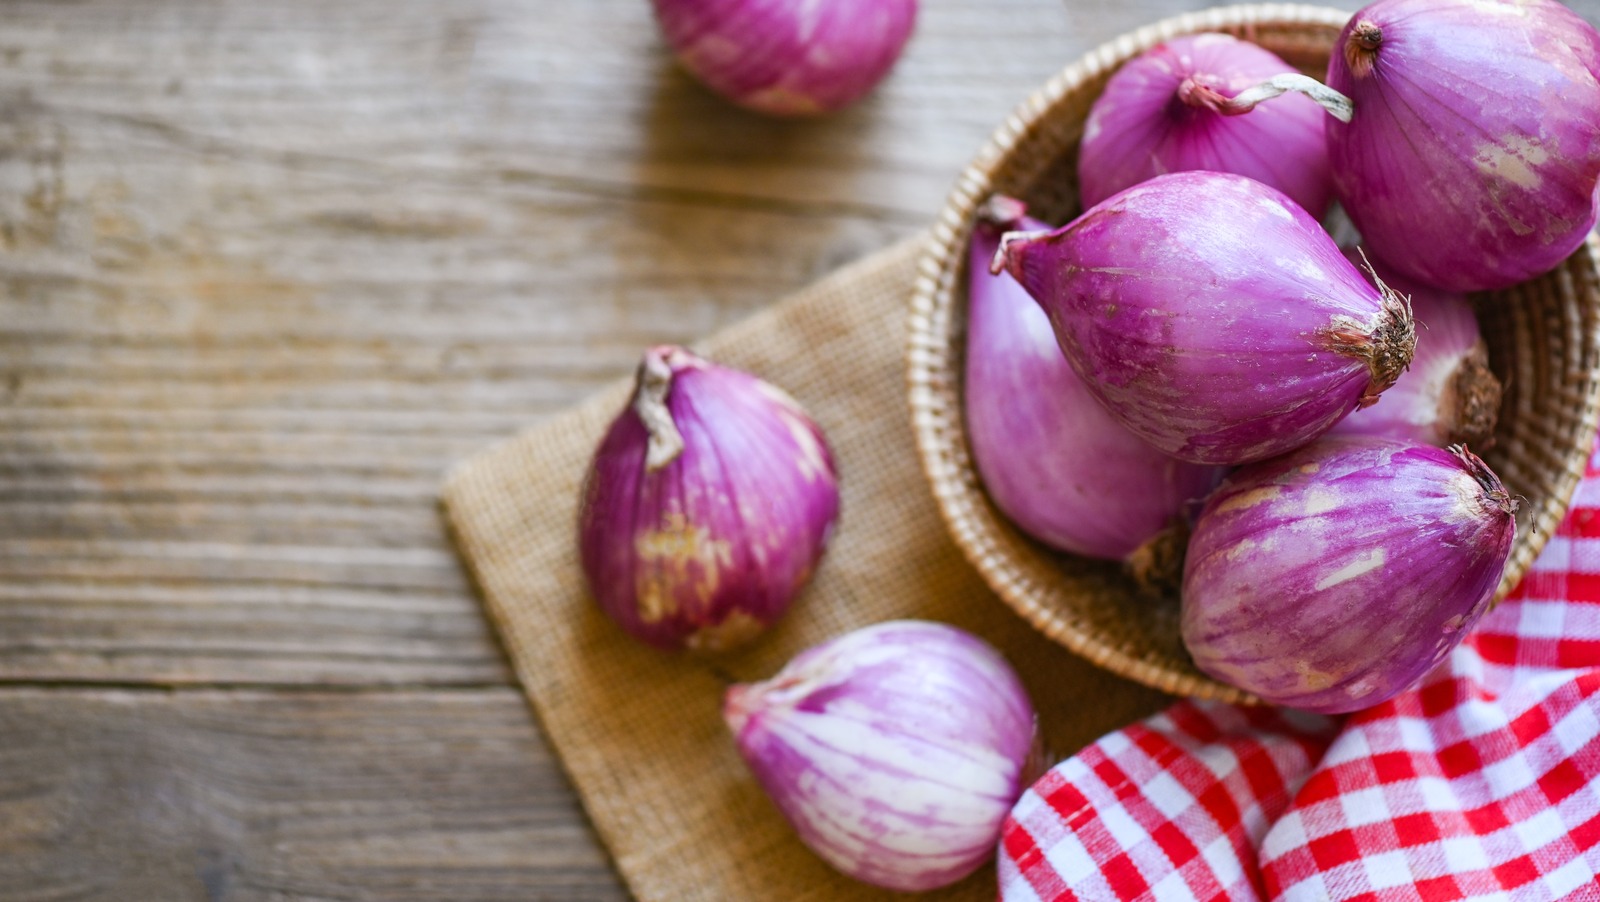 Shallot Shoots Information and Facts